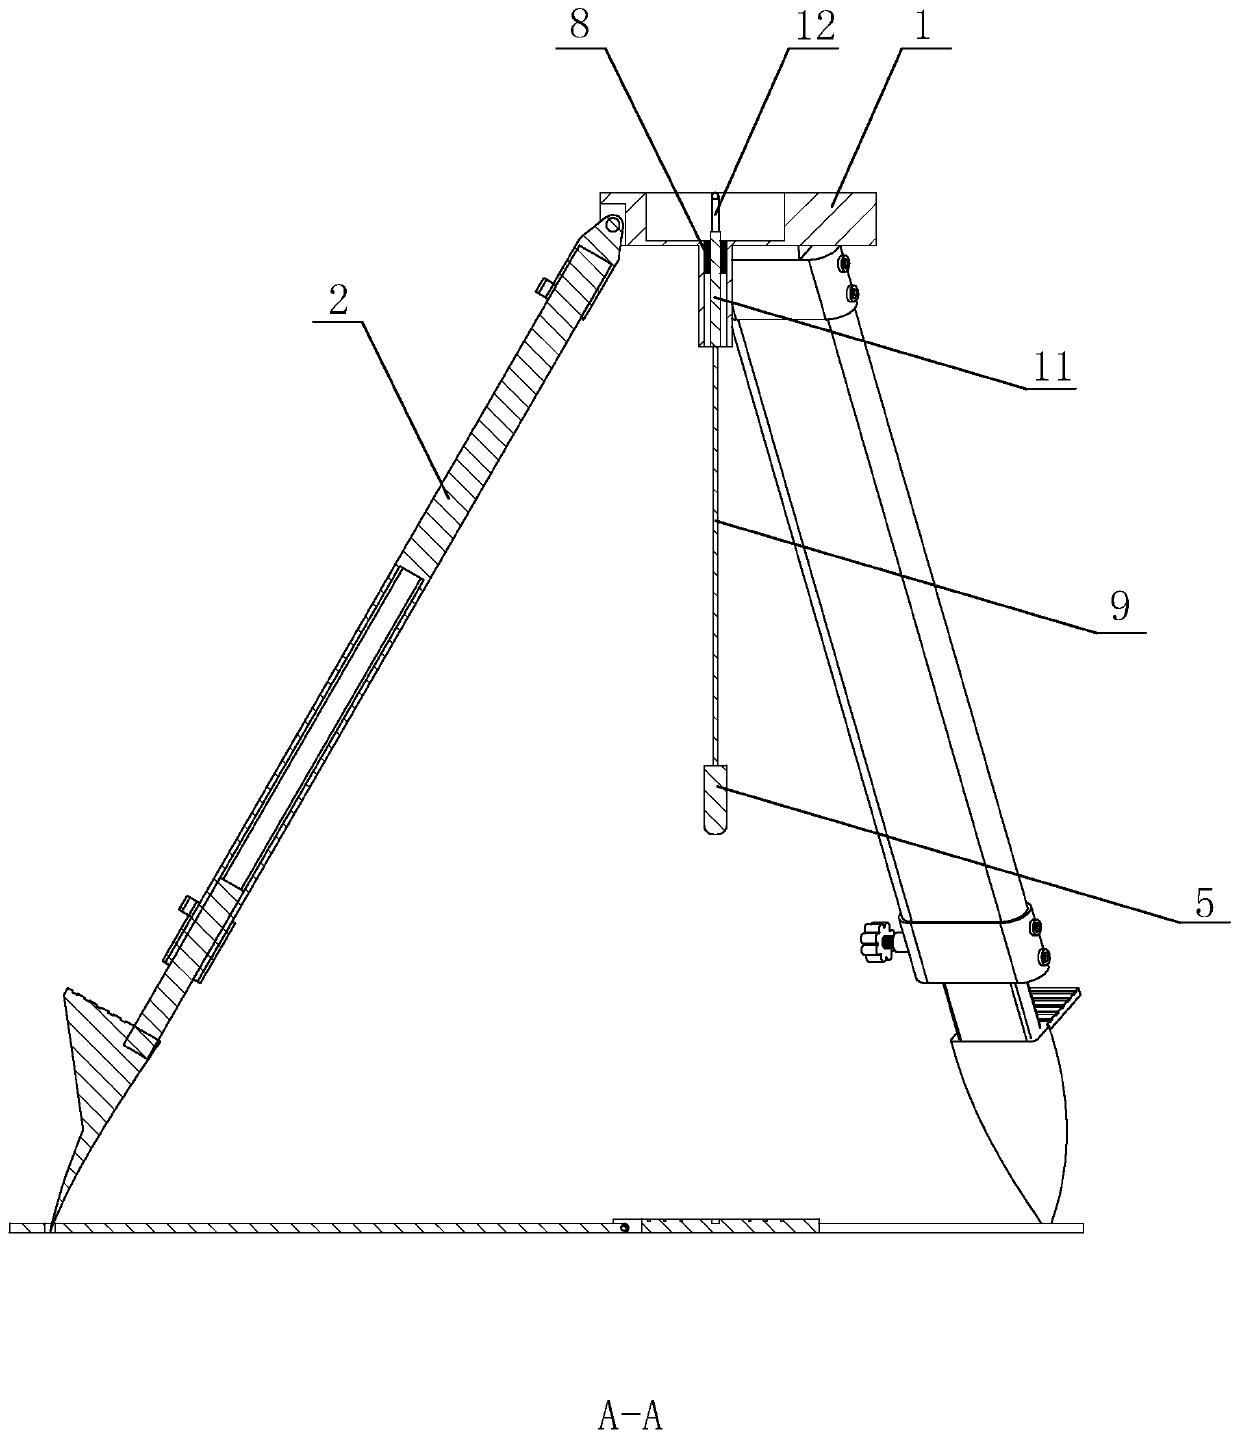 Triangular supporting device